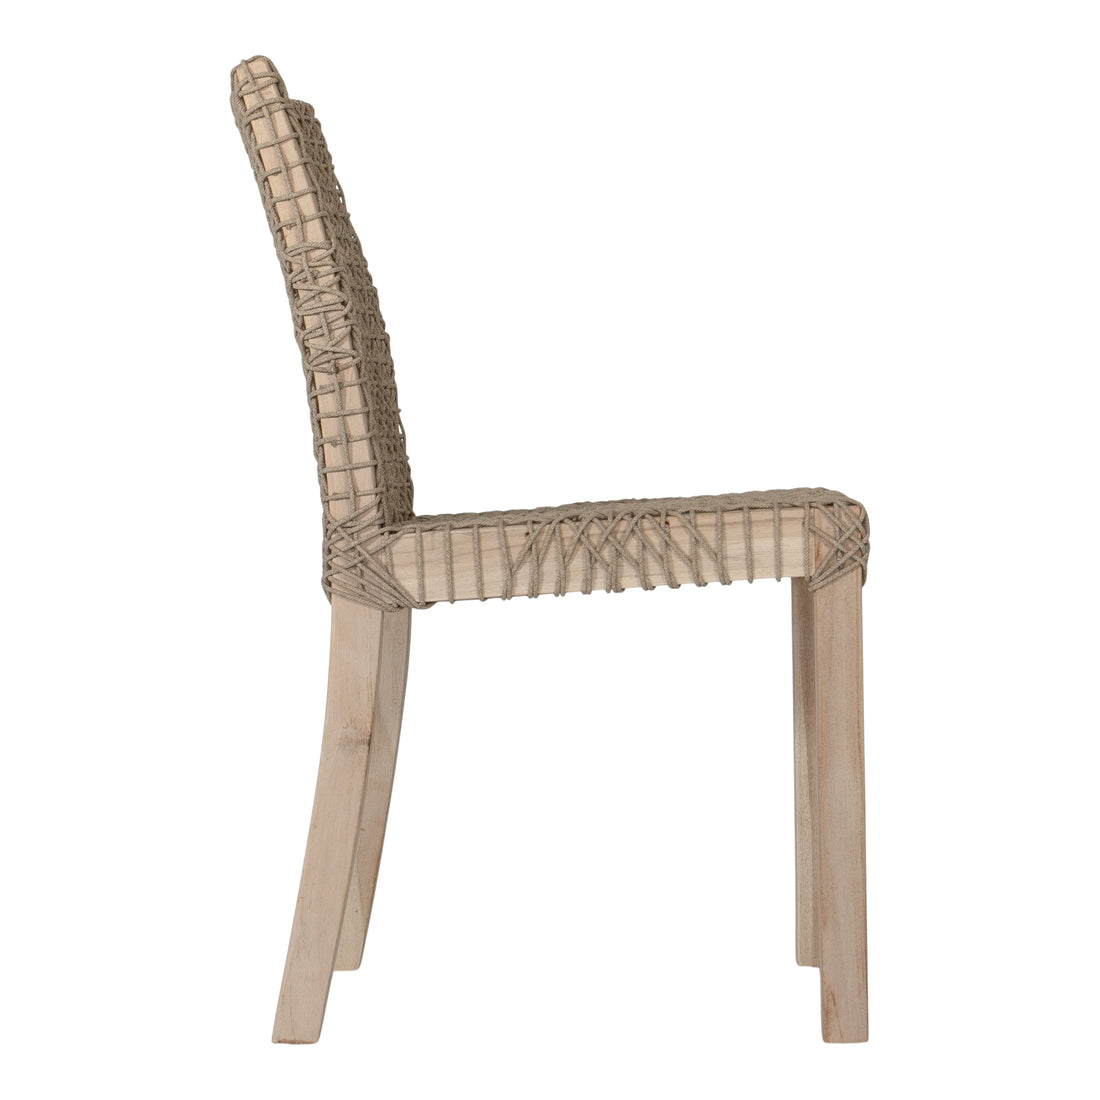 Sweni Dining Chair | Natural | Rope